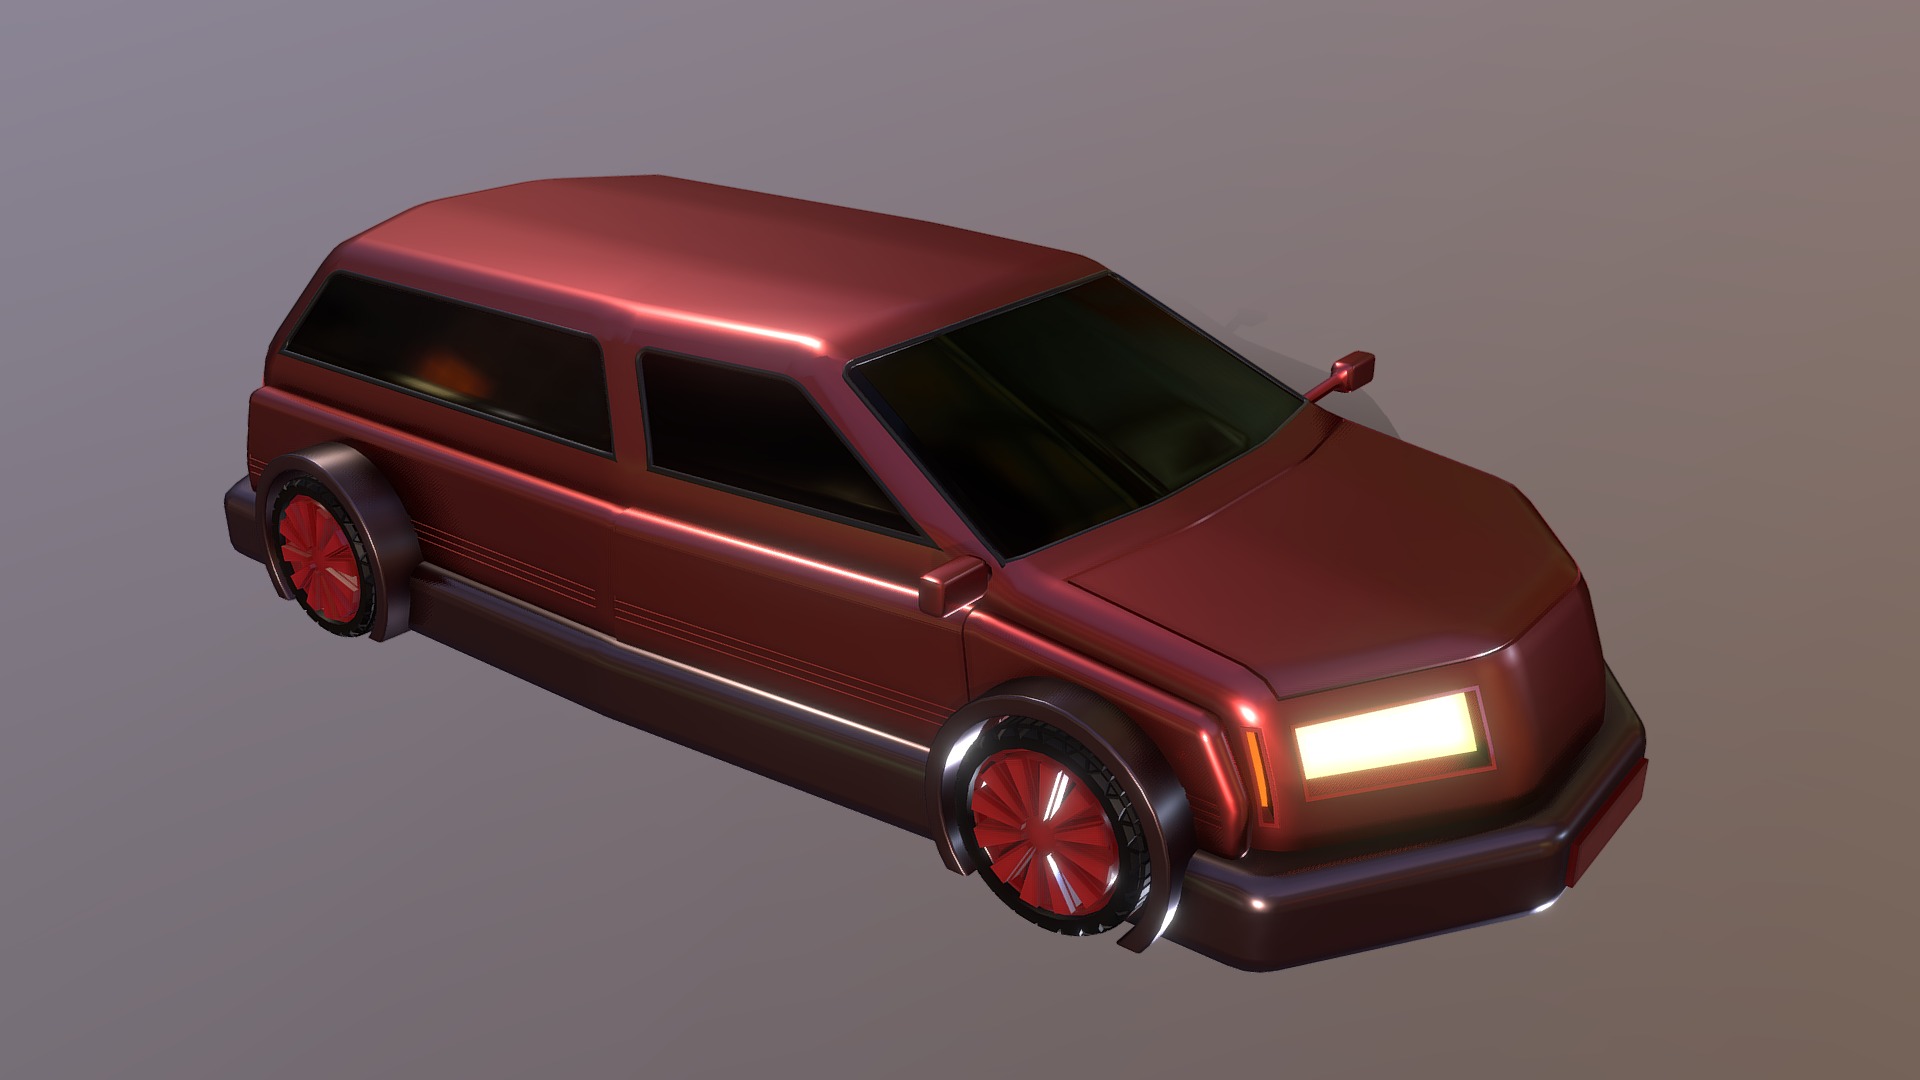 3D model Generic Truck 2 - This is a 3D model of the Generic Truck 2. The 3D model is about a red car with its lights on.